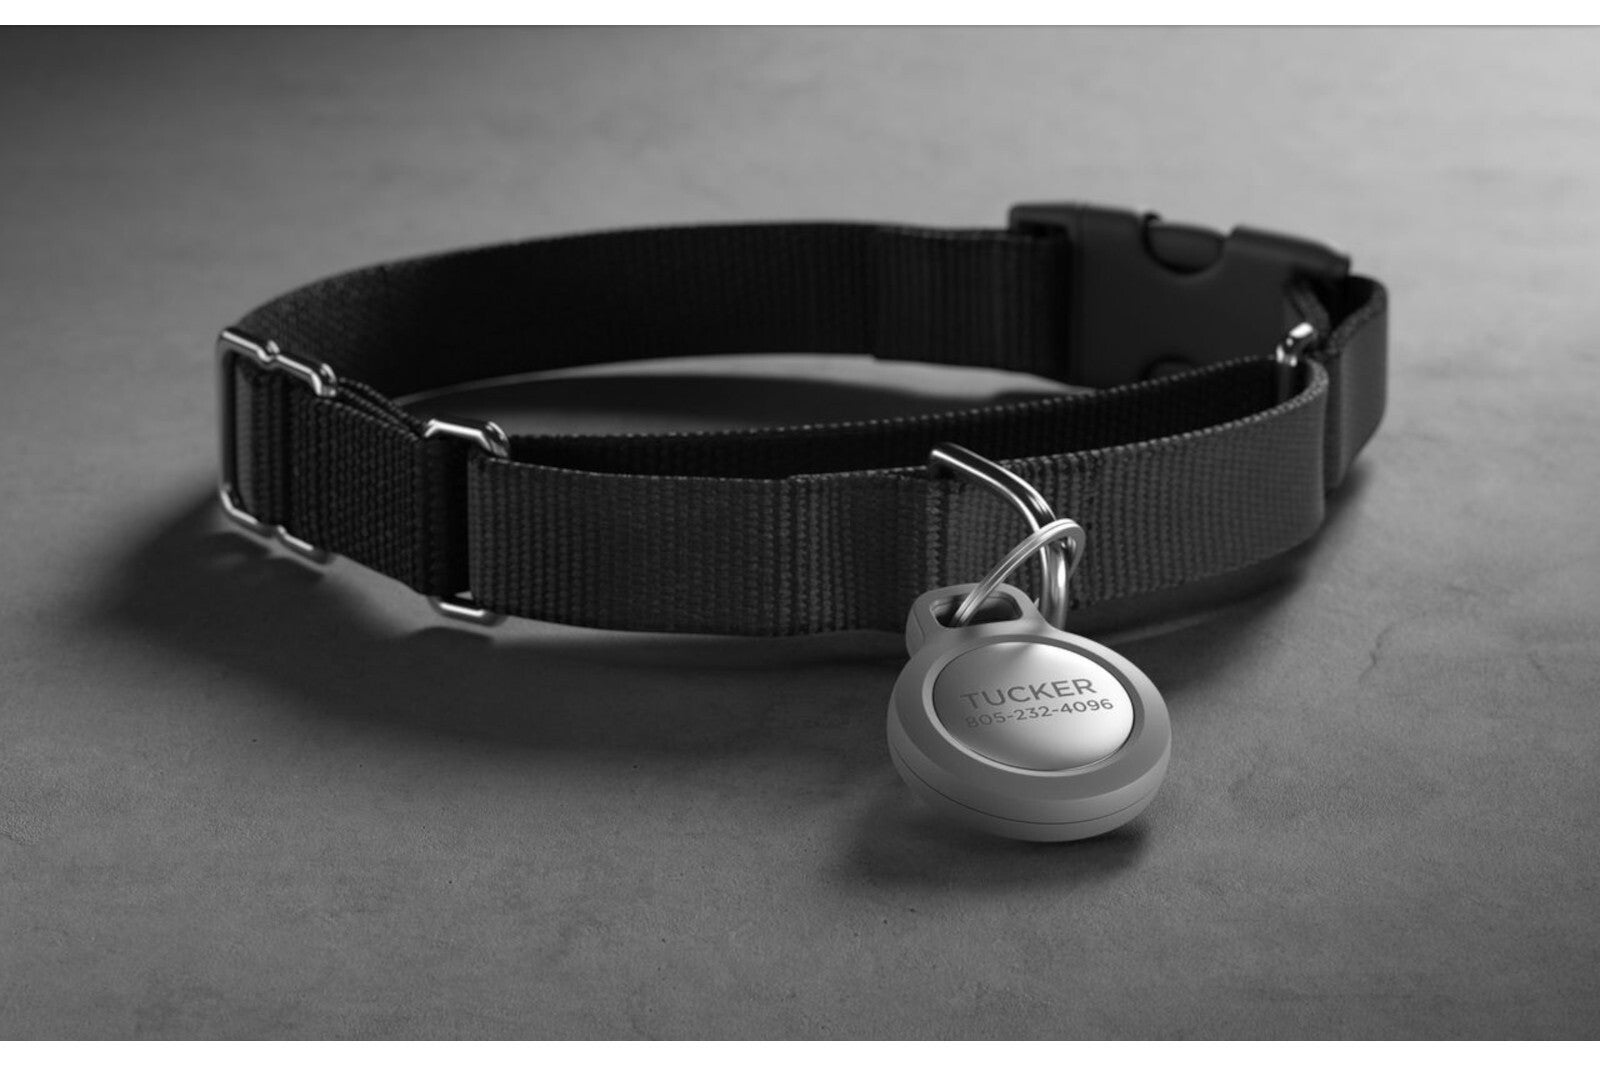 Nomad launches AirTag Rugged Keychain, pet ID tag engraving